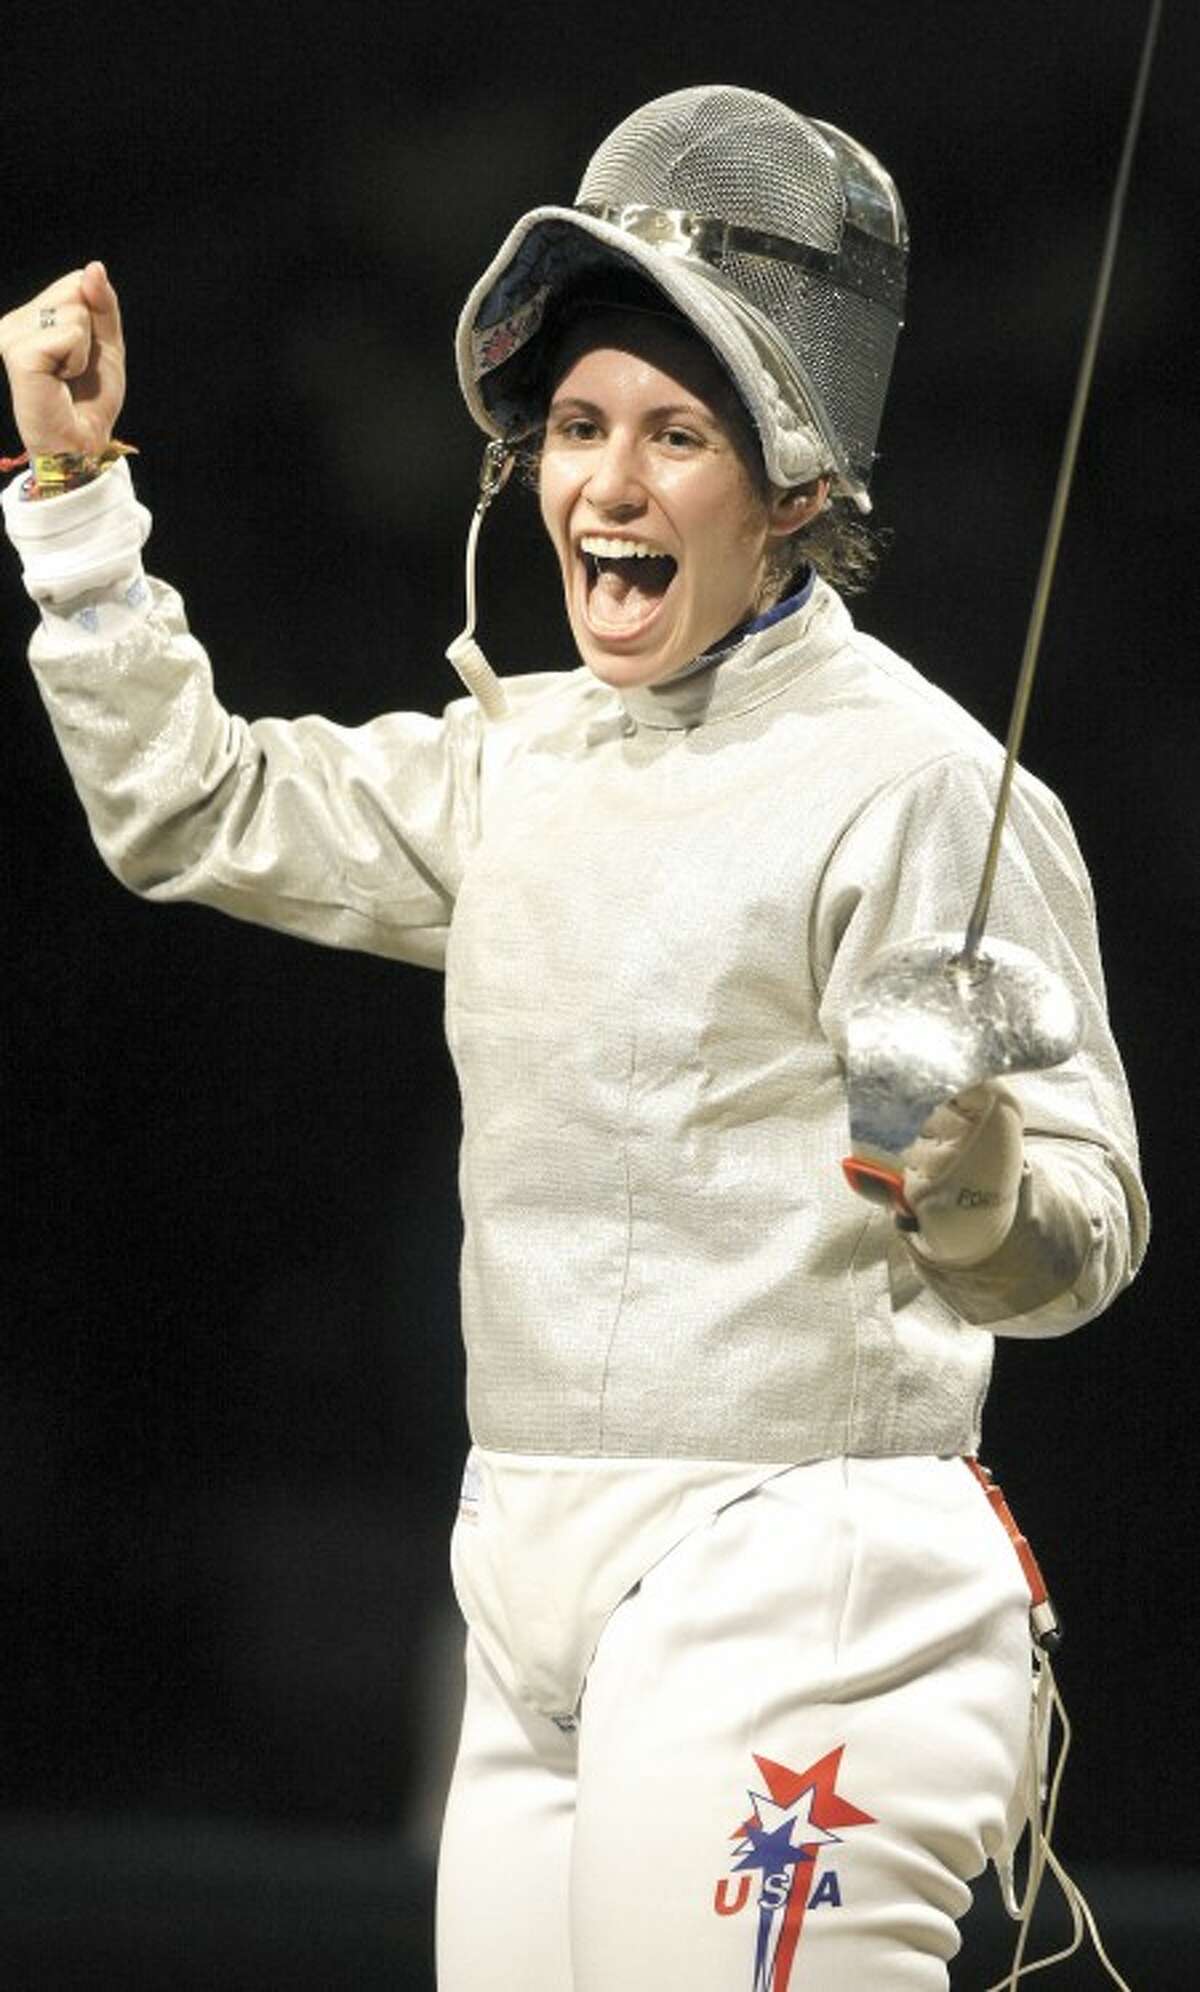 AP Photo - Success by USA''s Sada Jacobson, a Yale graduate who won the silver medal in fencing at the Olympics, brings more people into sports.